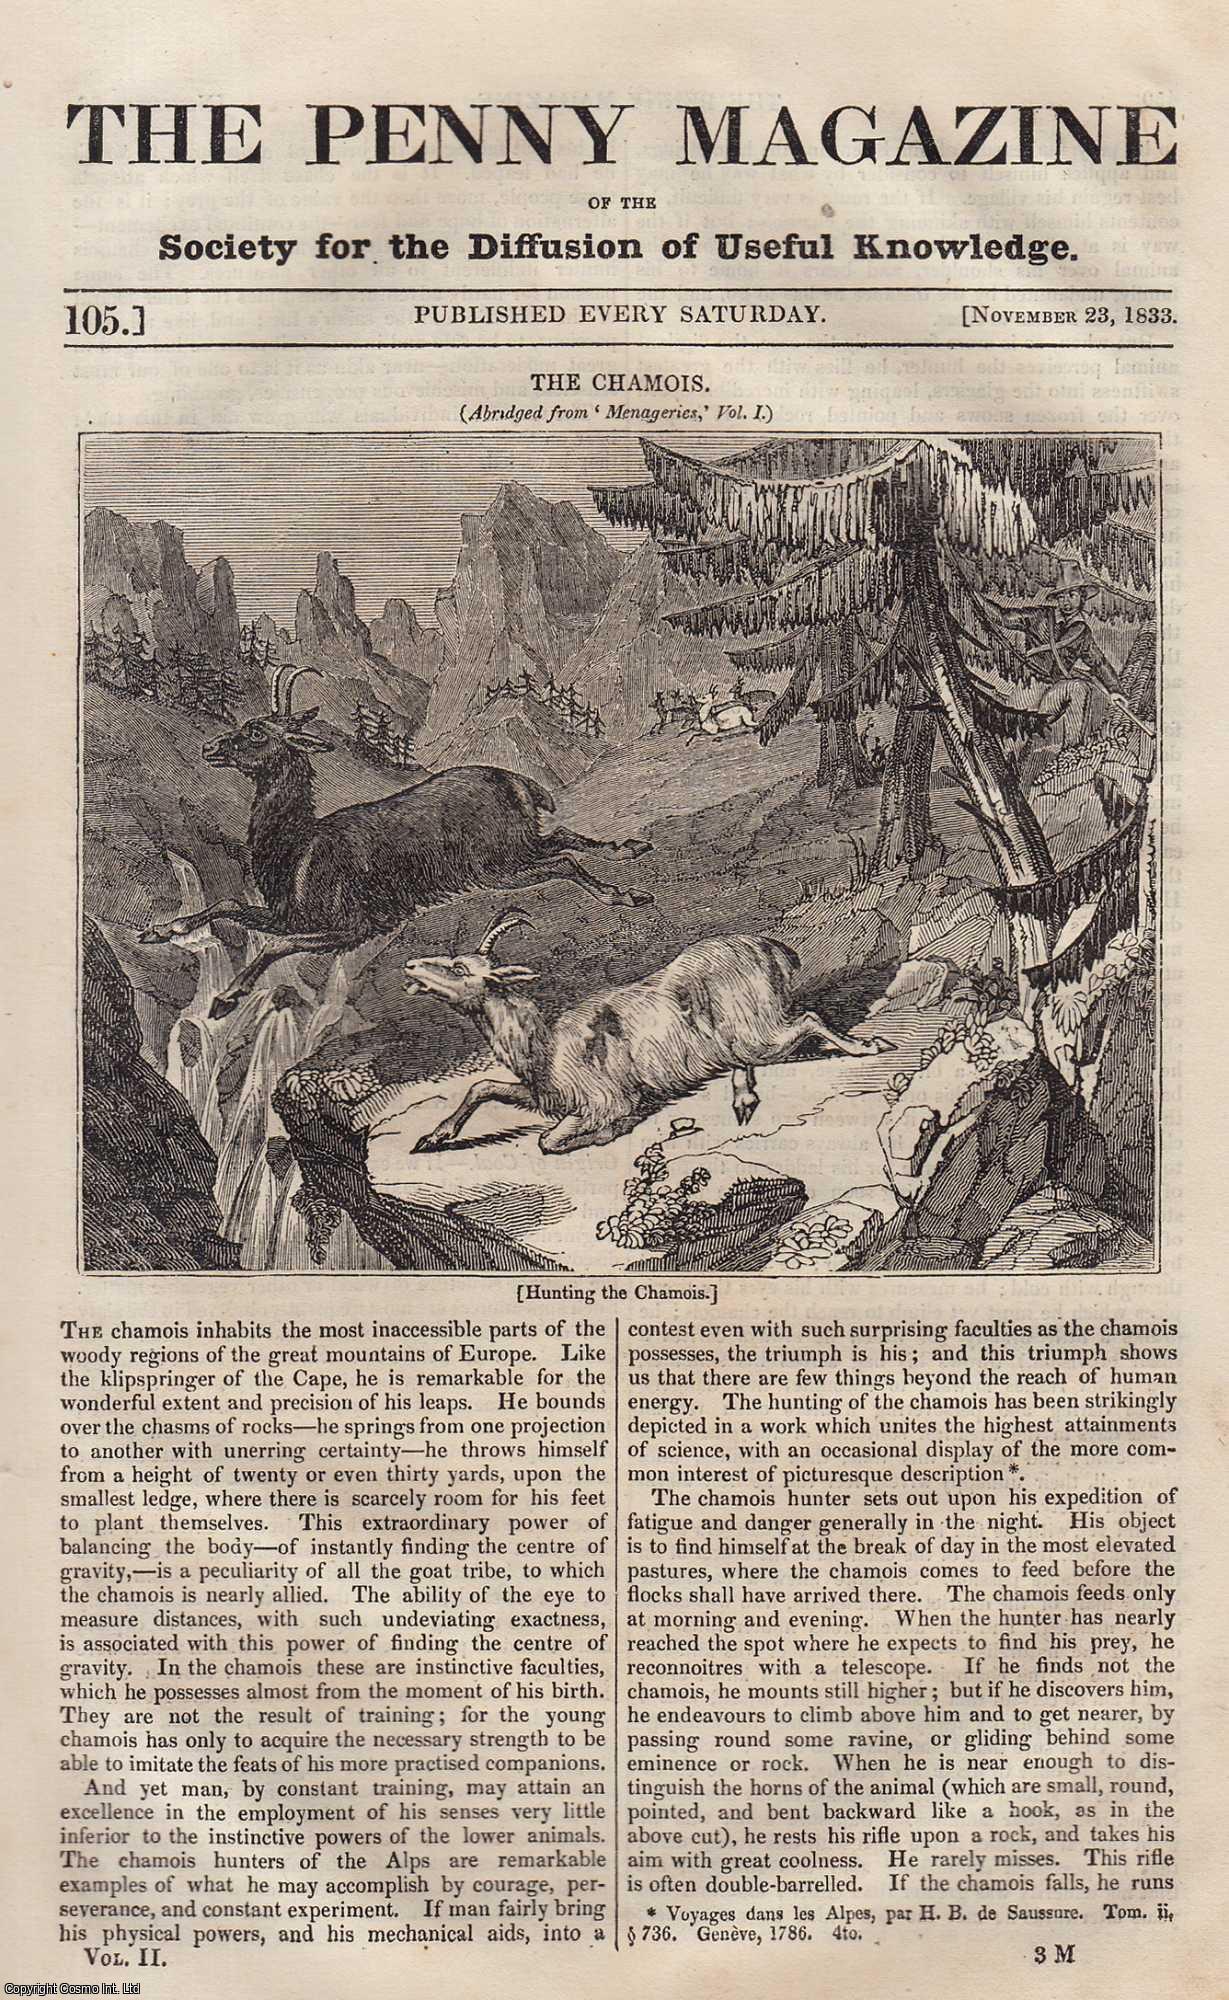 Penny Magazine - Hunting The Chamois (Goat like animal); Brighton Chain Pier (Bridges), etc. Issue No. 105, November 23rd, 1833. A complete original weekly issue of the Penny Magazine, 1833.